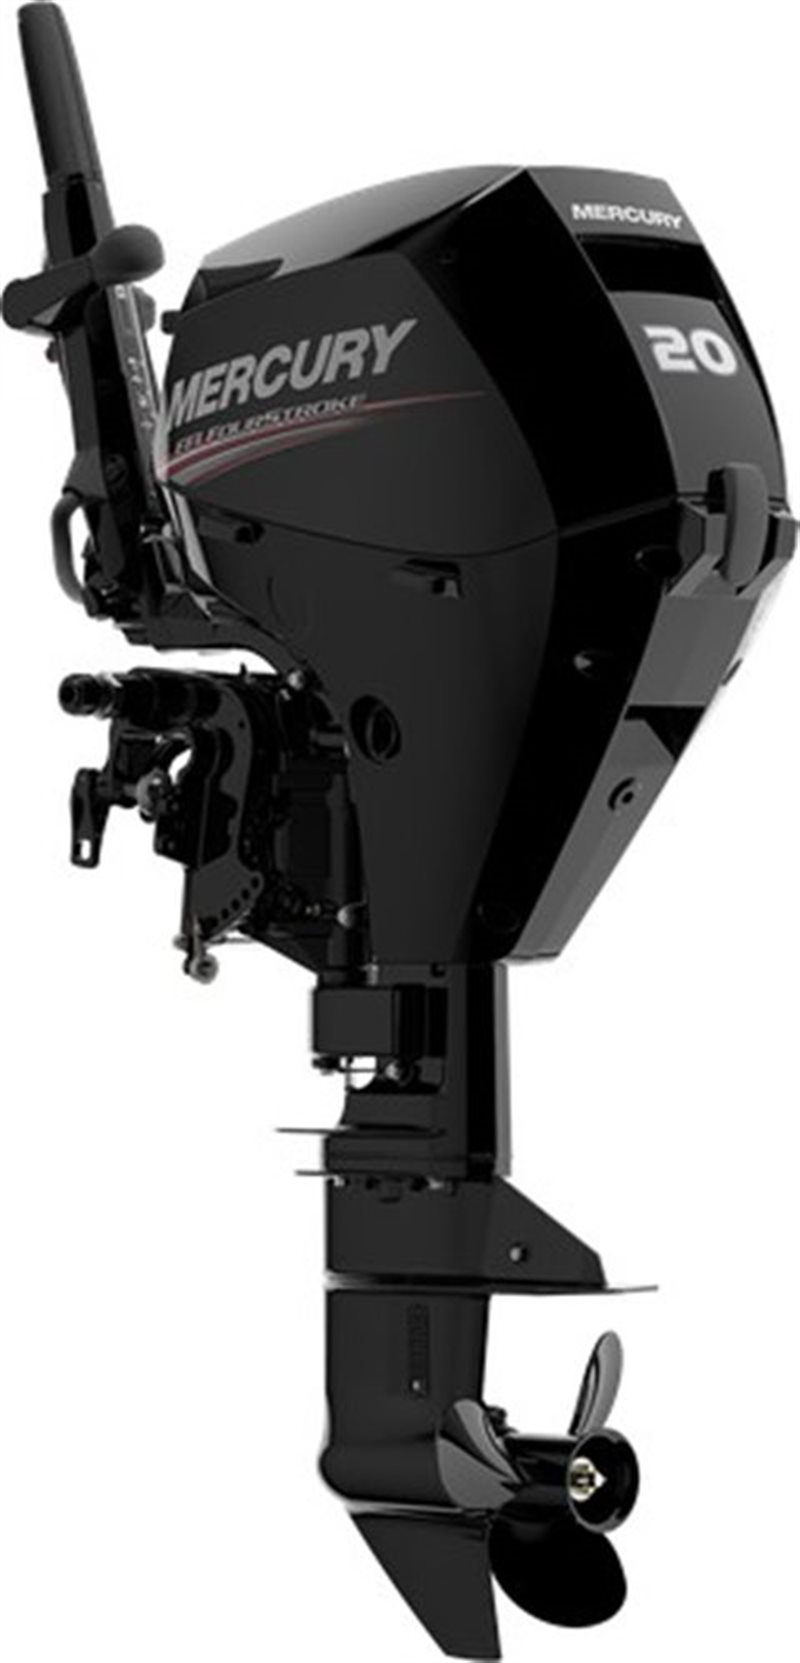 2020 Mercury Outboard FourStroke 15-20 hp 20 EFI at Fort Fremont Marine